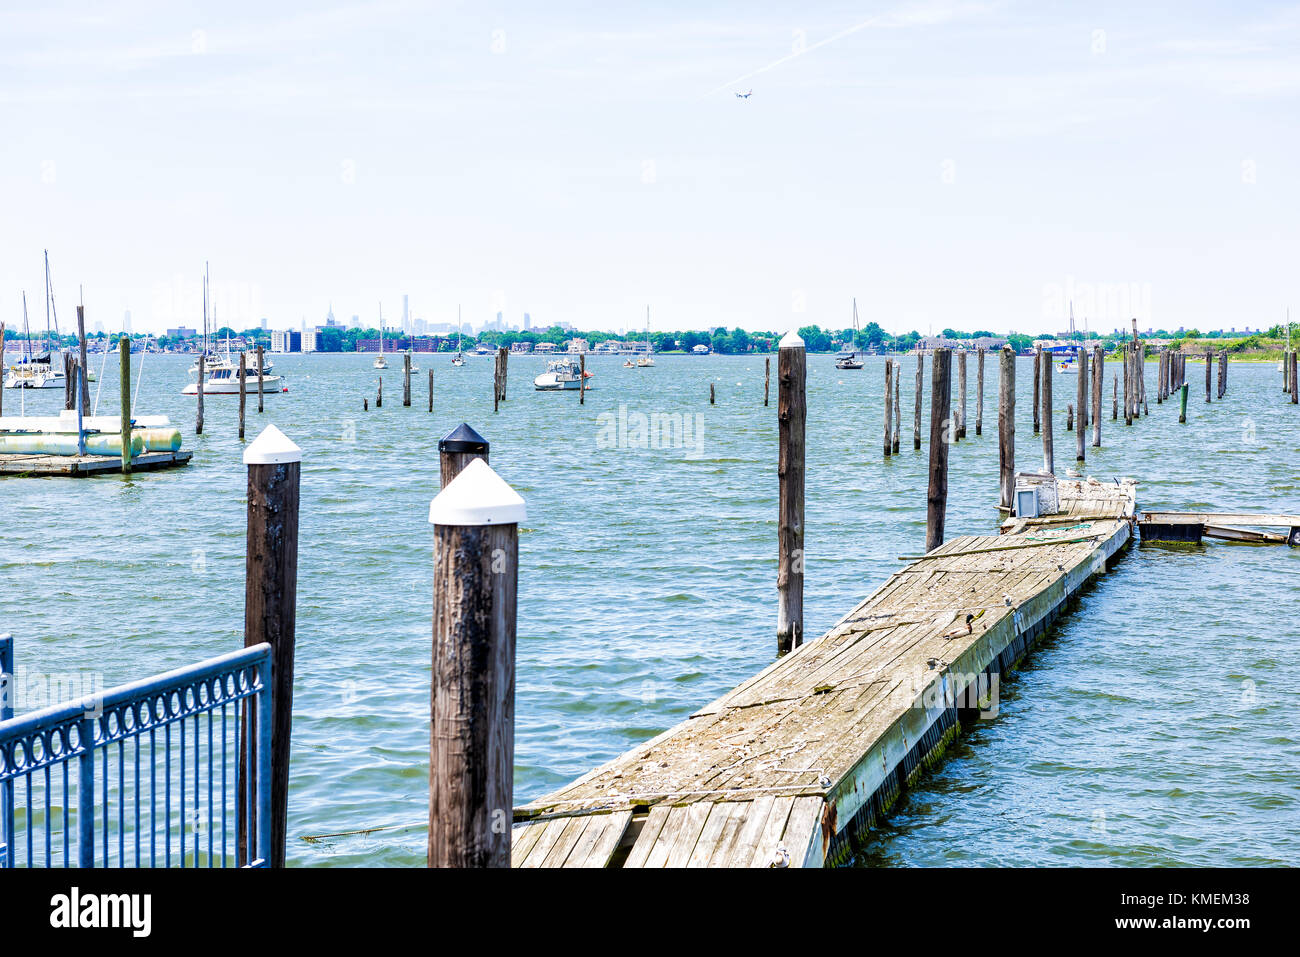 City Island harbor in Bronx, New York with boats and pier, Manhattan skyline or cityscape in distance Stock Photo